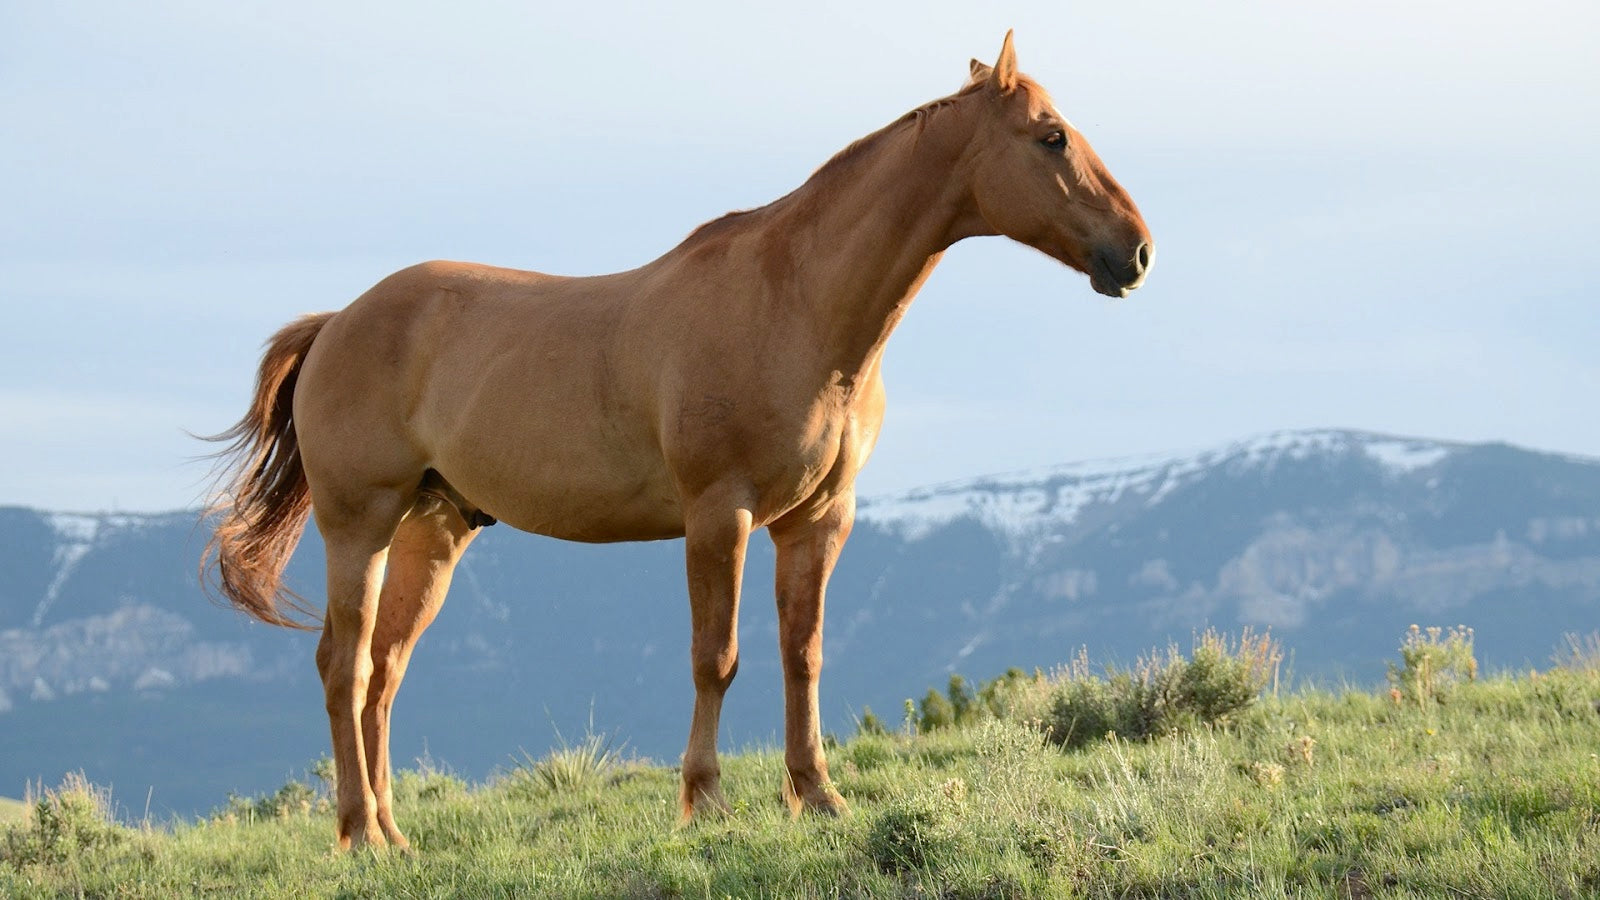 Easy Ways to Improve Your Horse’s Health